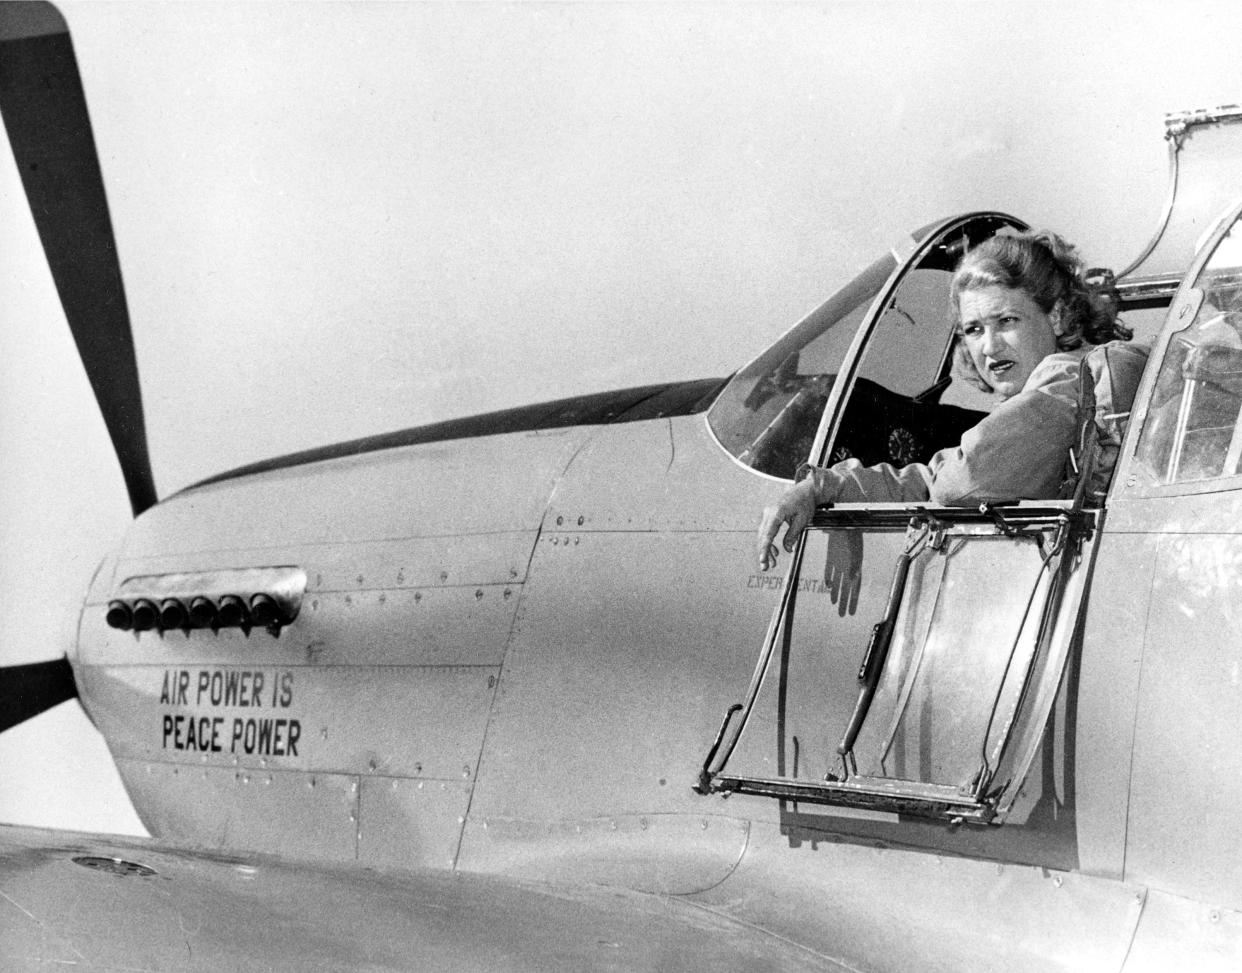 Pilot Jacqueline Cochran looks from the cockpit of her P-51 Mustang at Palm Springs, Ca., on Dec. 10, 1947.